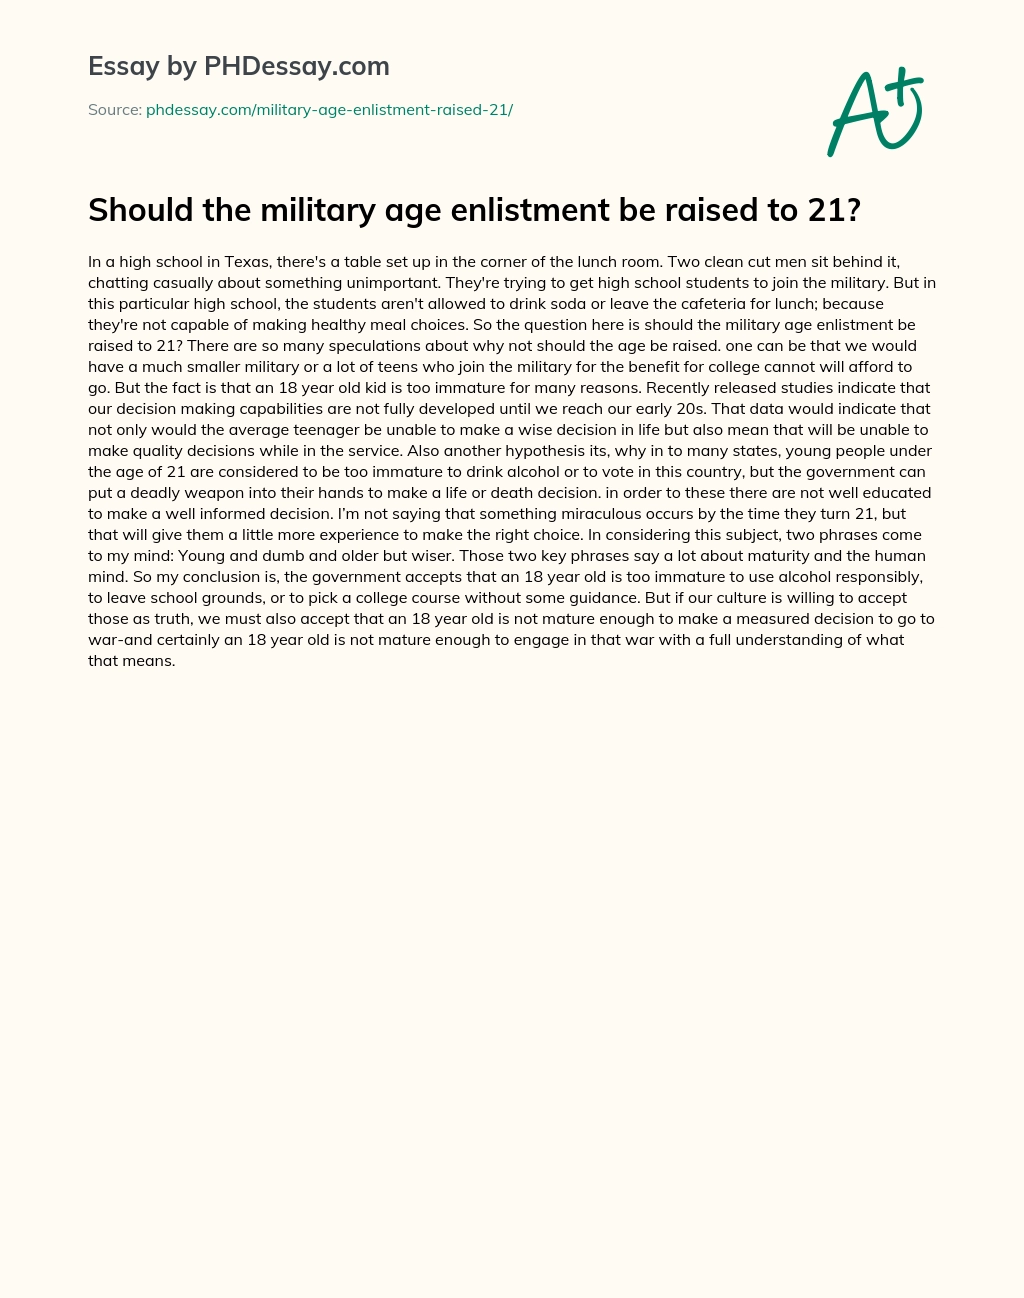 Should the military age enlistment be raised to 21? essay